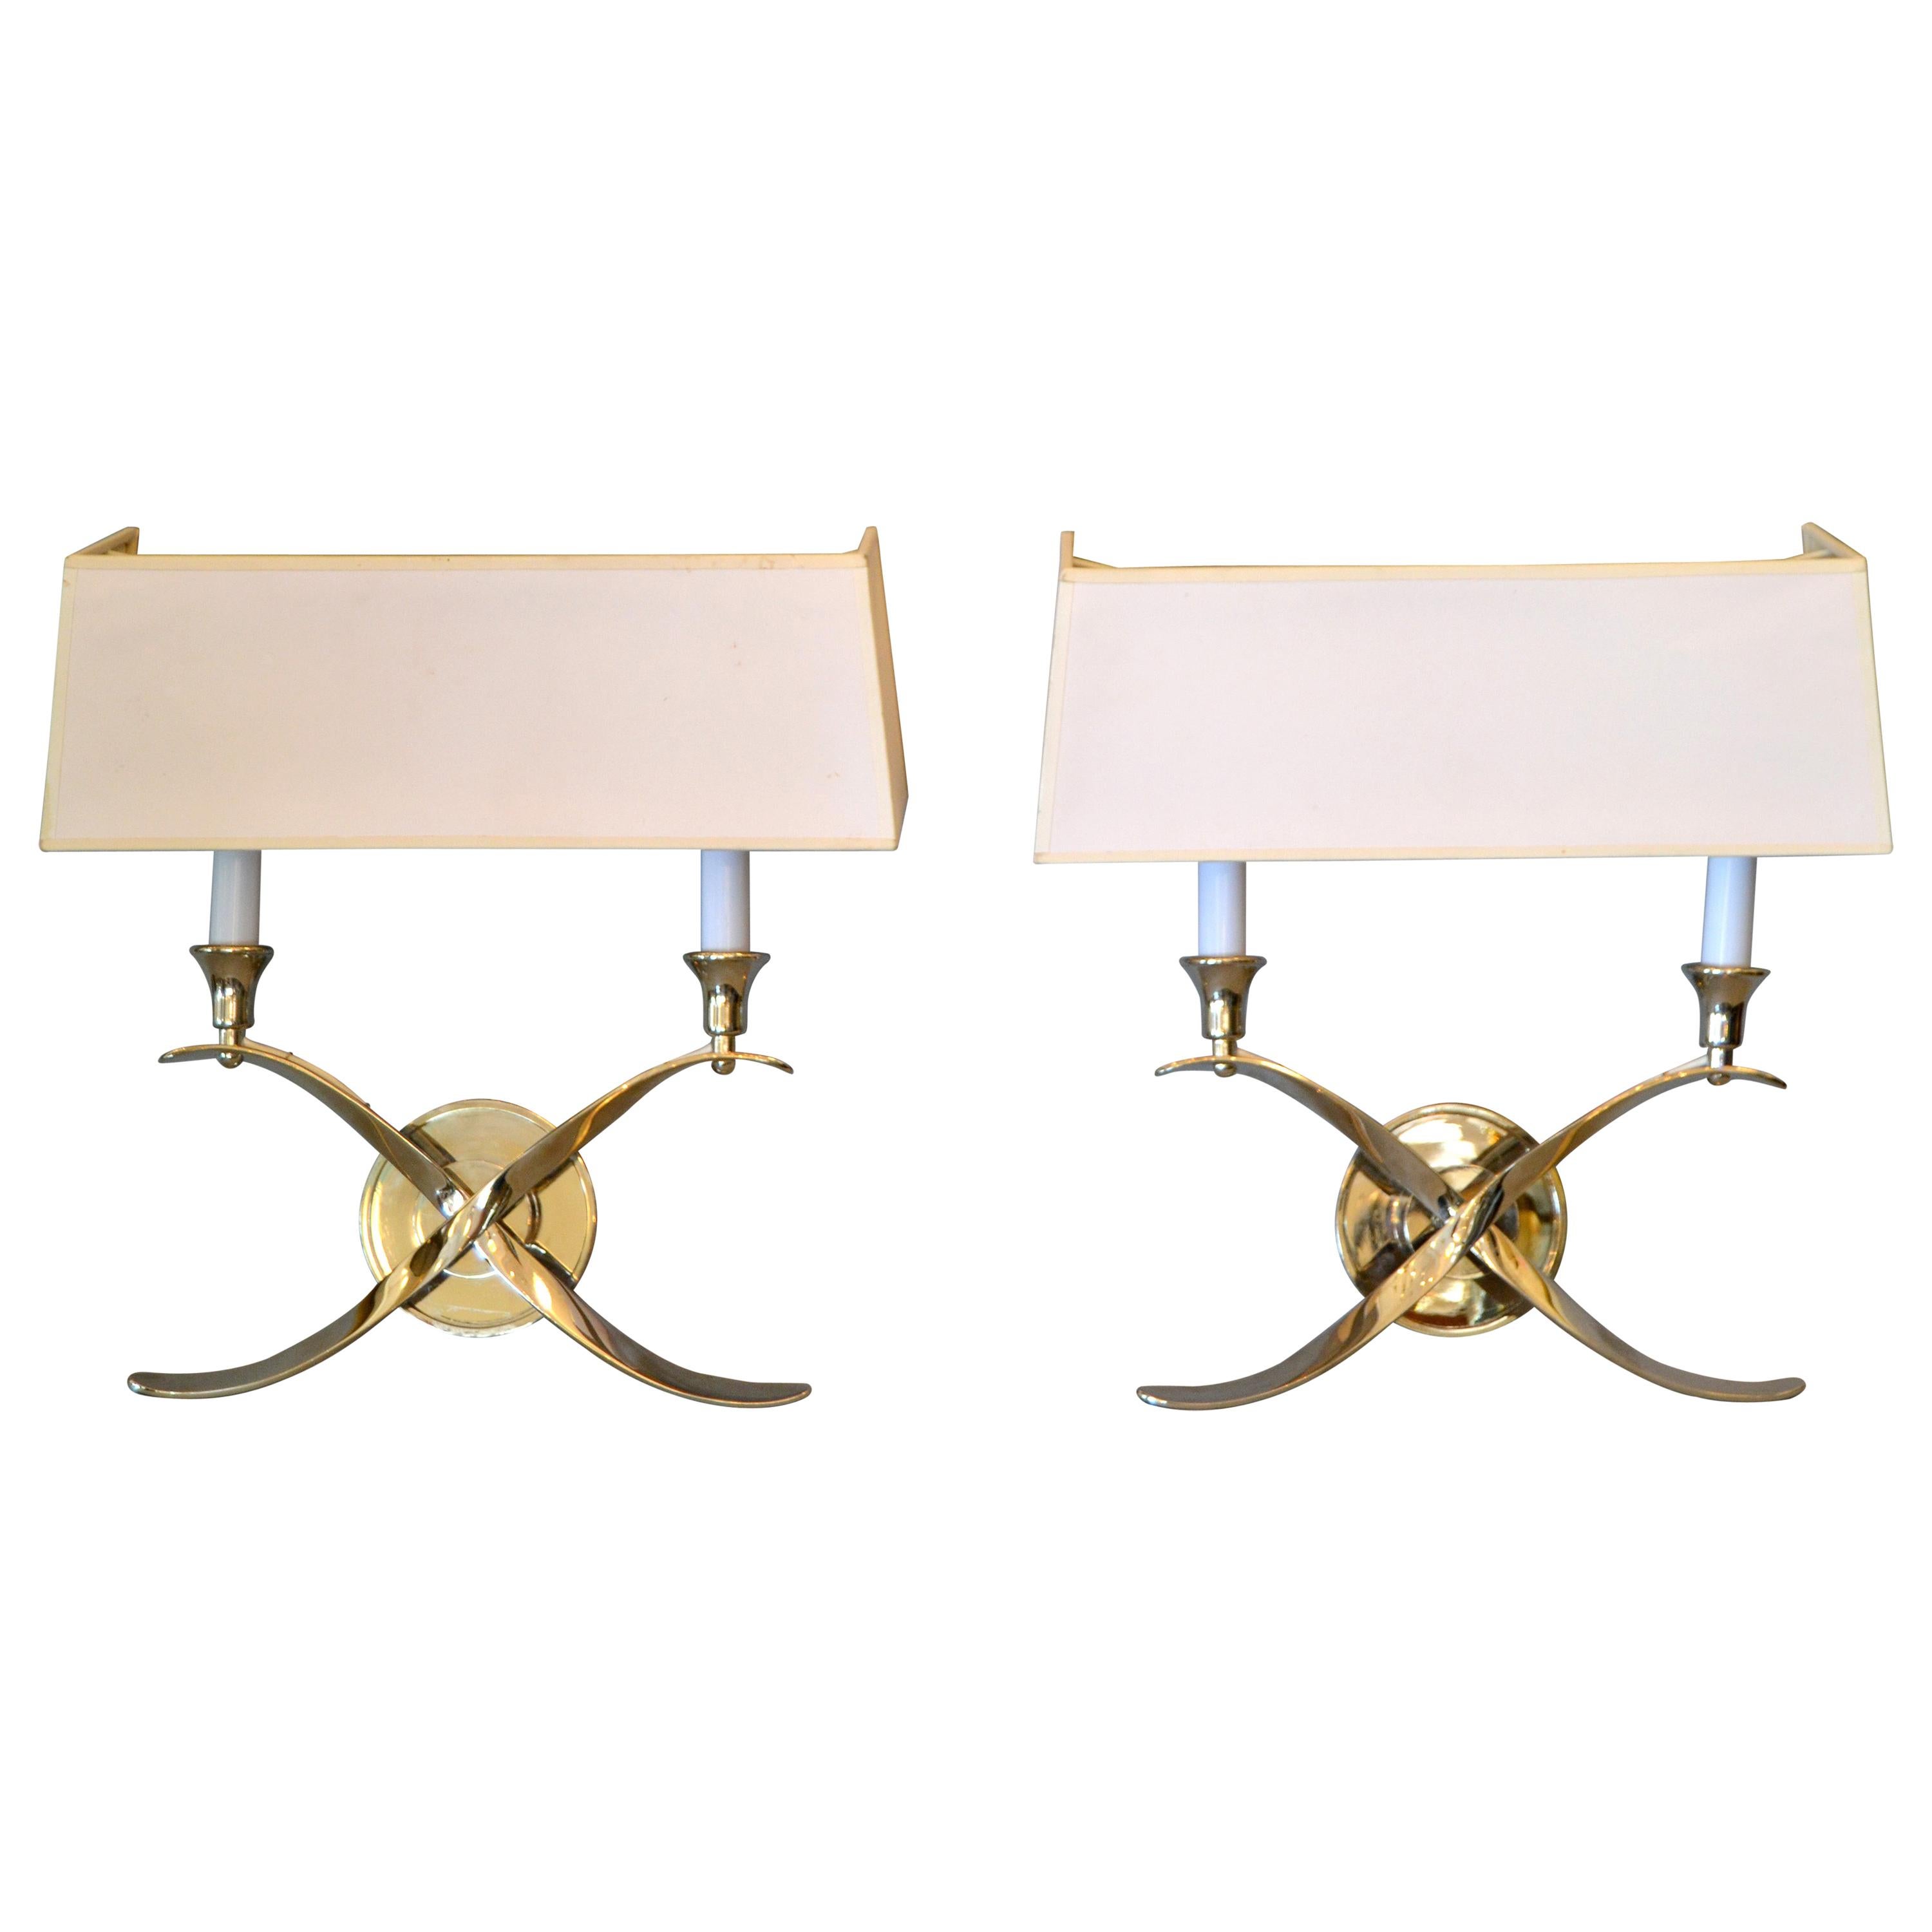 Elegant Crossed Scrollwork Stainless Steel Double Sconces and Paper Shades, Pair